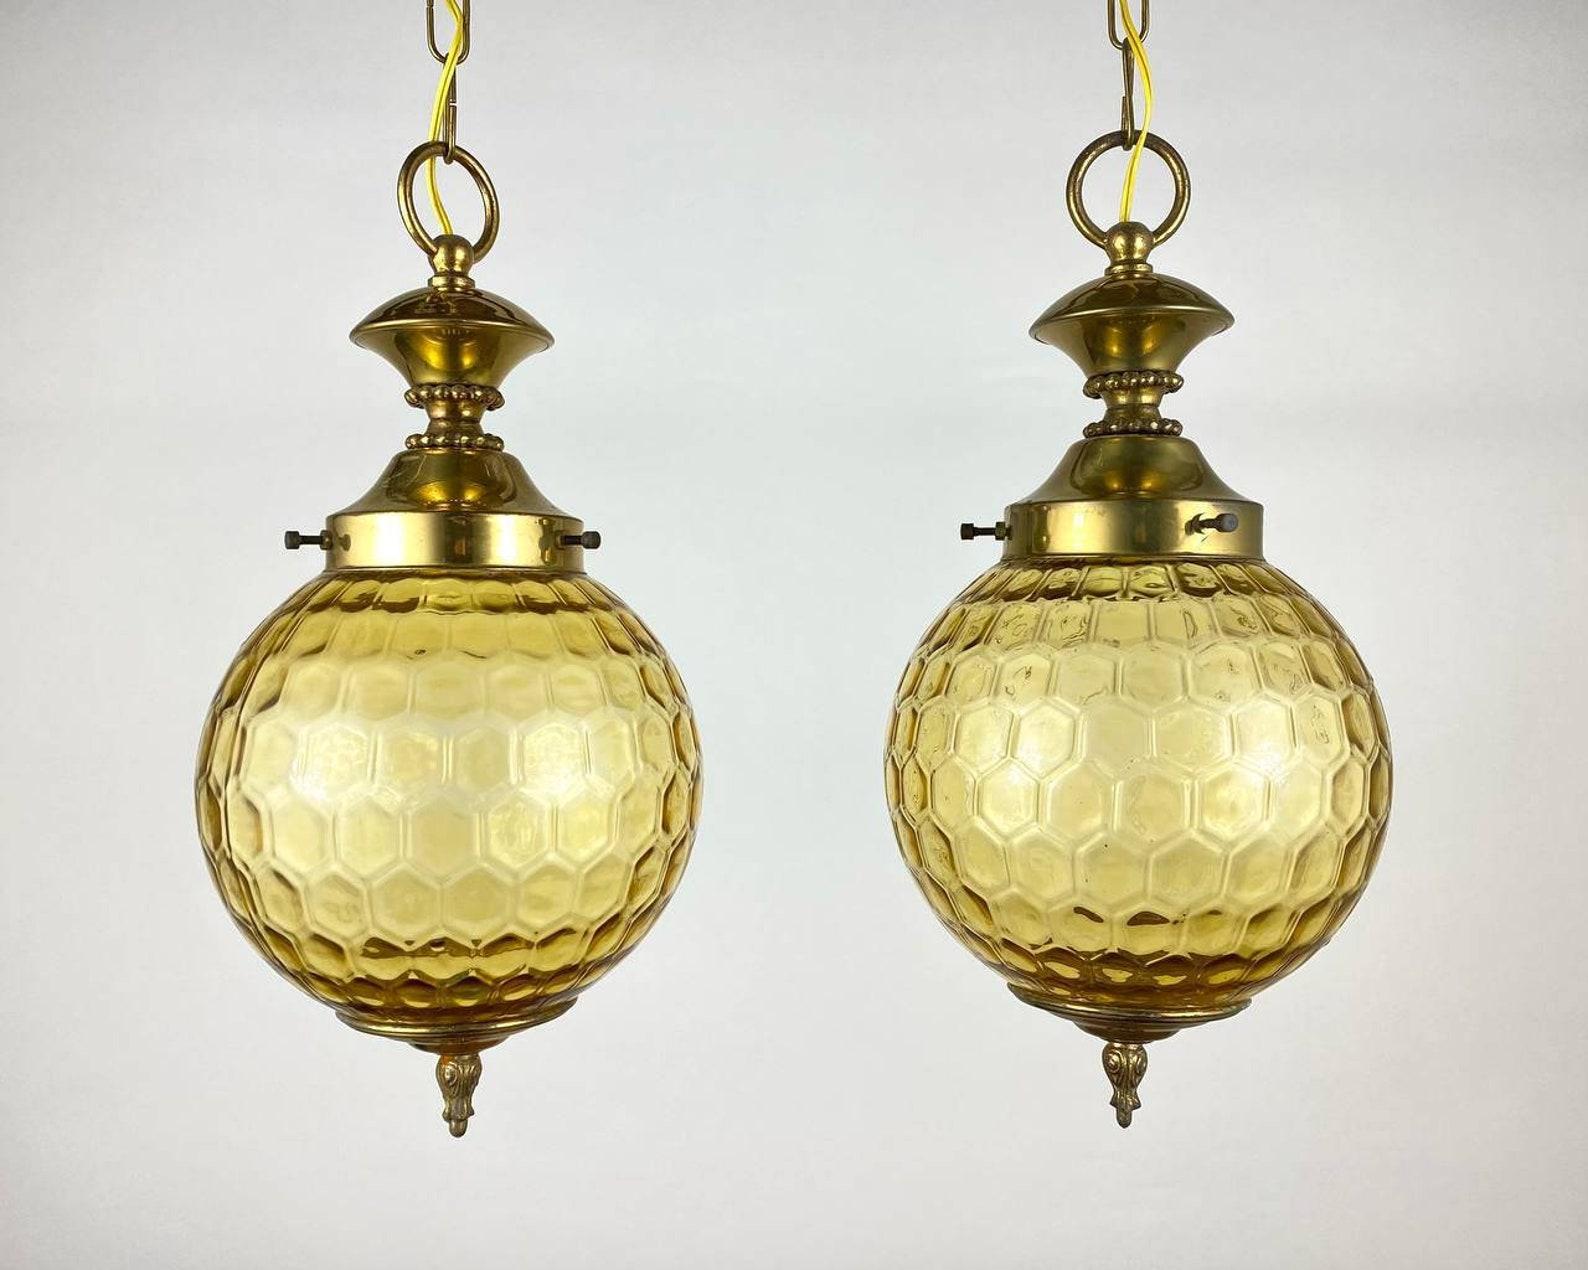 Neoclassical Vintage Ceiling Lamp or Lantern Gilt Brass and Textured Glass Suspention For Sale